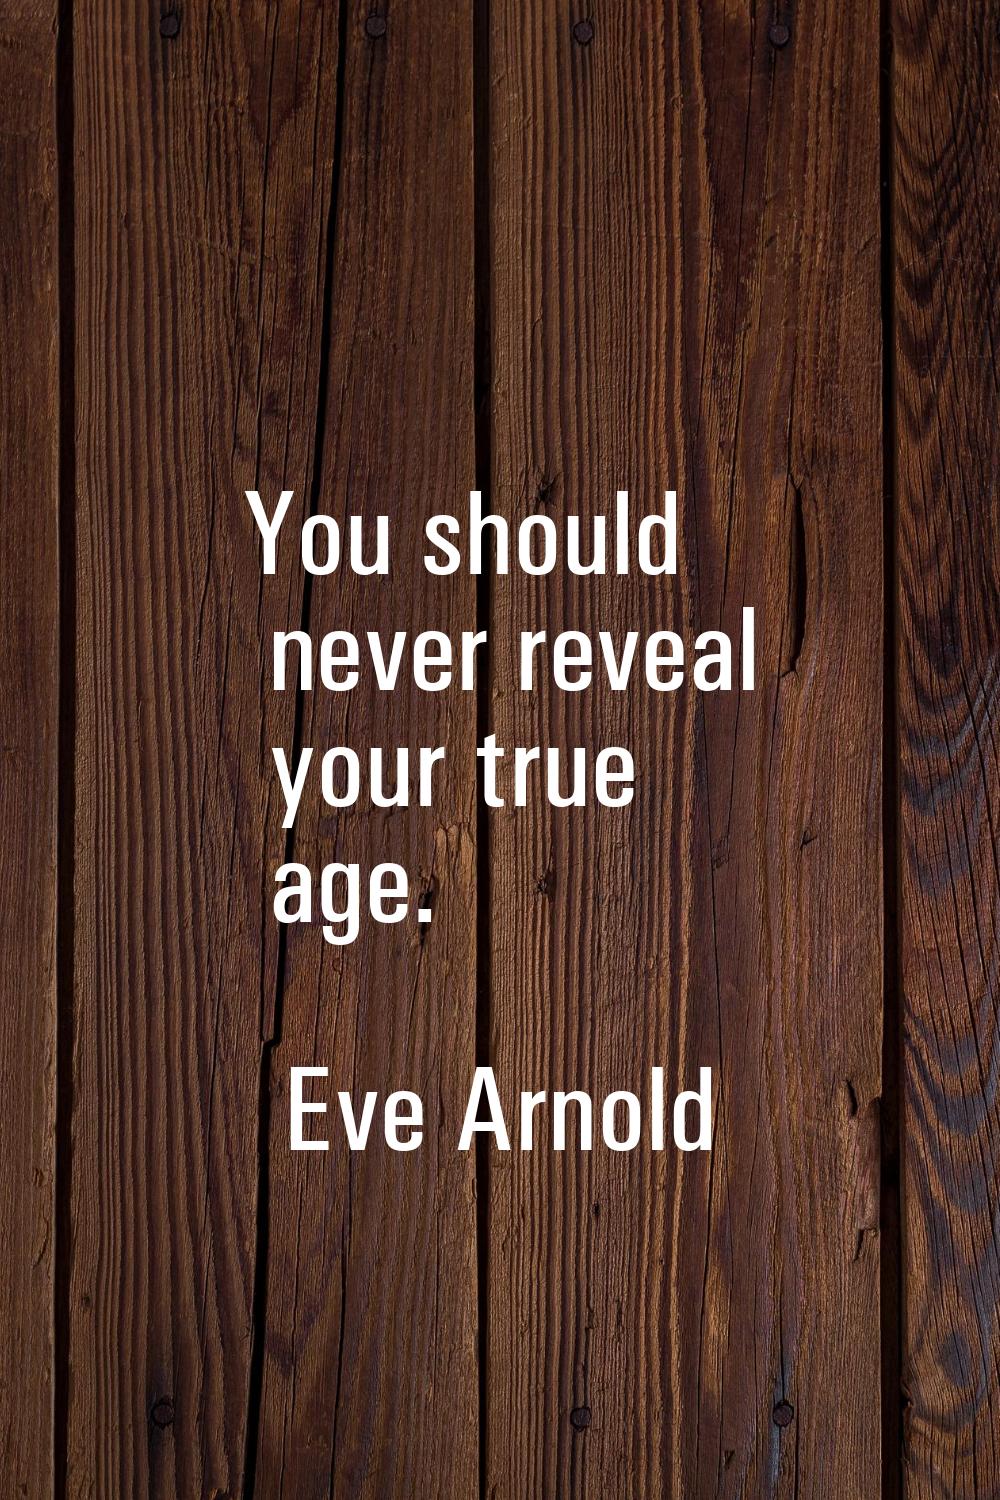 You should never reveal your true age.